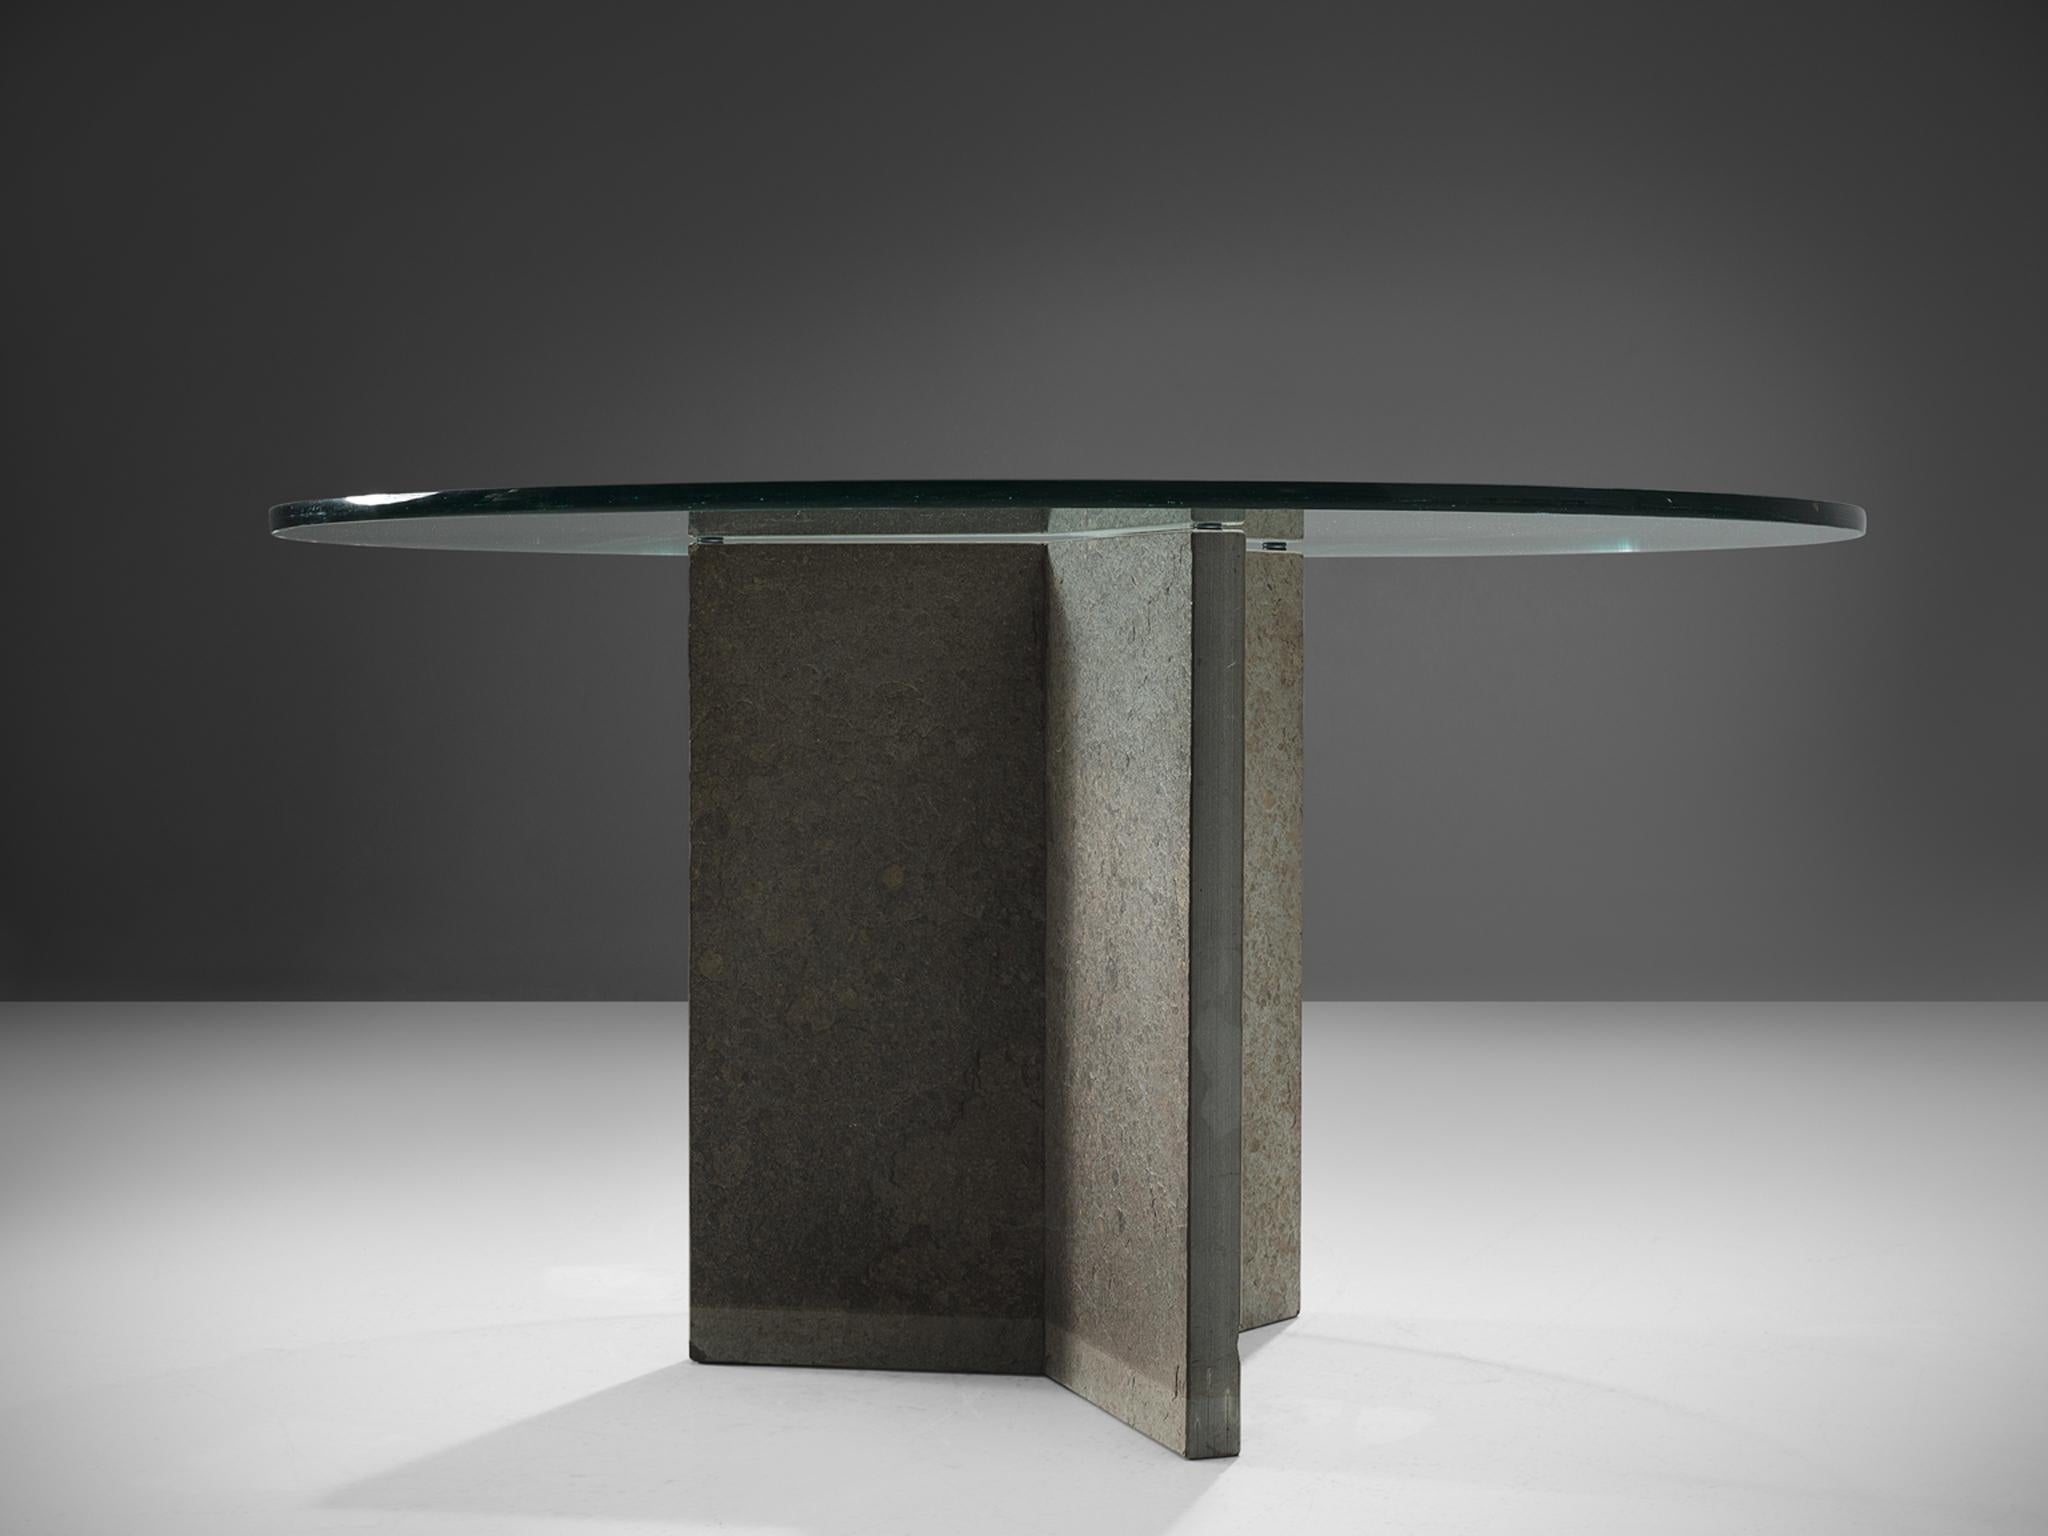 Late 20th Century Italian Pedestal Center Table with Stone and Glass